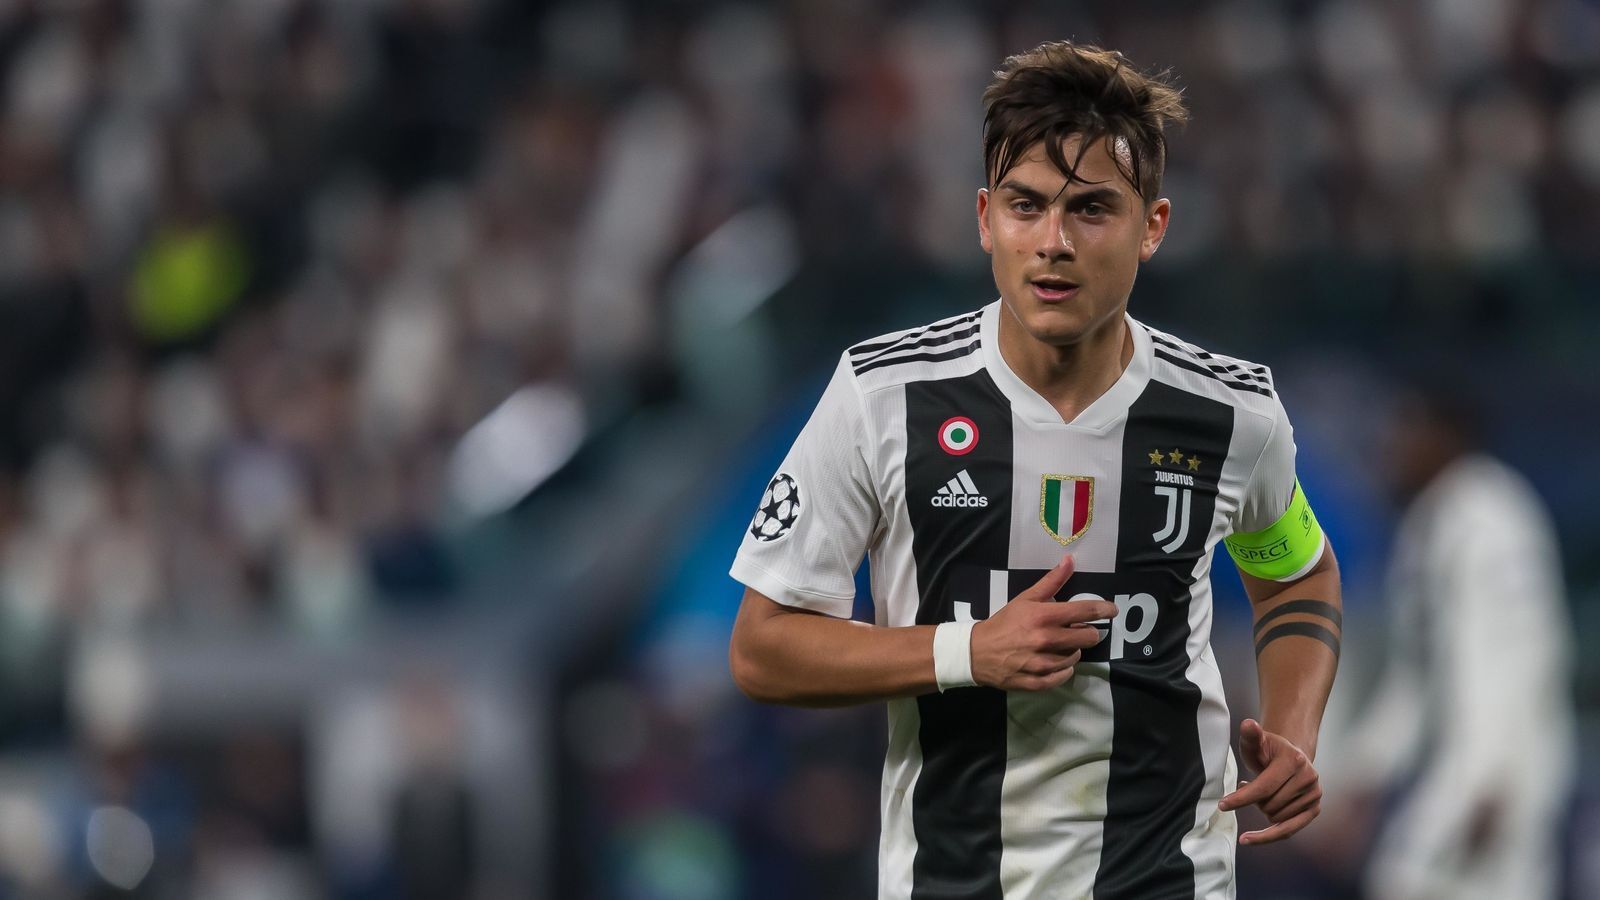 Dybala Will Become the New Juventus Captain after Extending His Deal